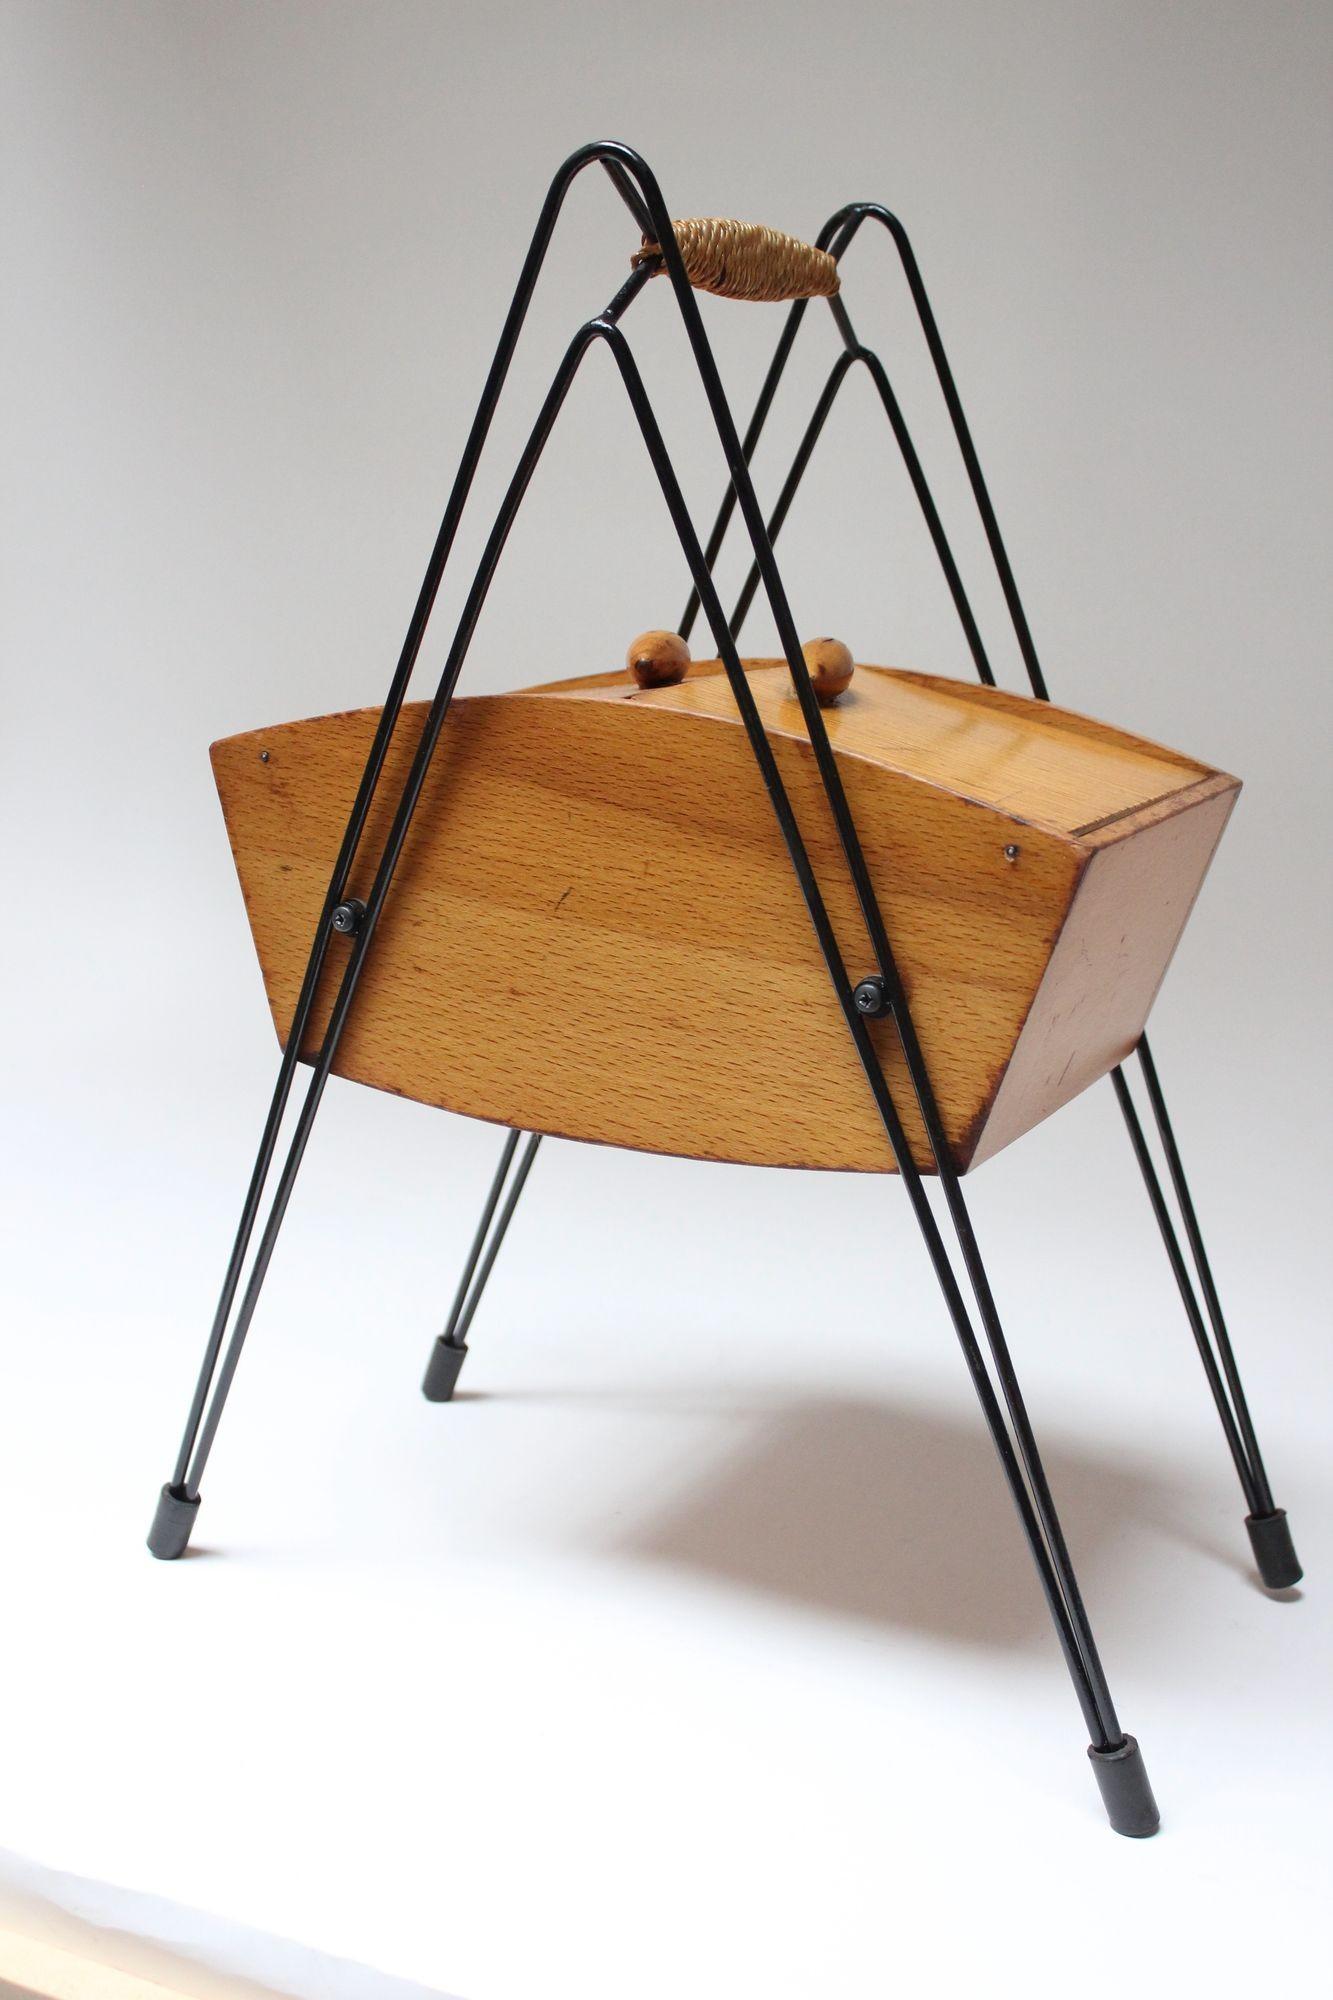 Charming, petite maple sewing box with black painted metal frame and cane-wrapped handle, all supported by rubber feet (ca. 1950s, Italy).
Minimalist design with simple dual-door construction fitted with deeply sculpted oblong pulls.
Conservatively